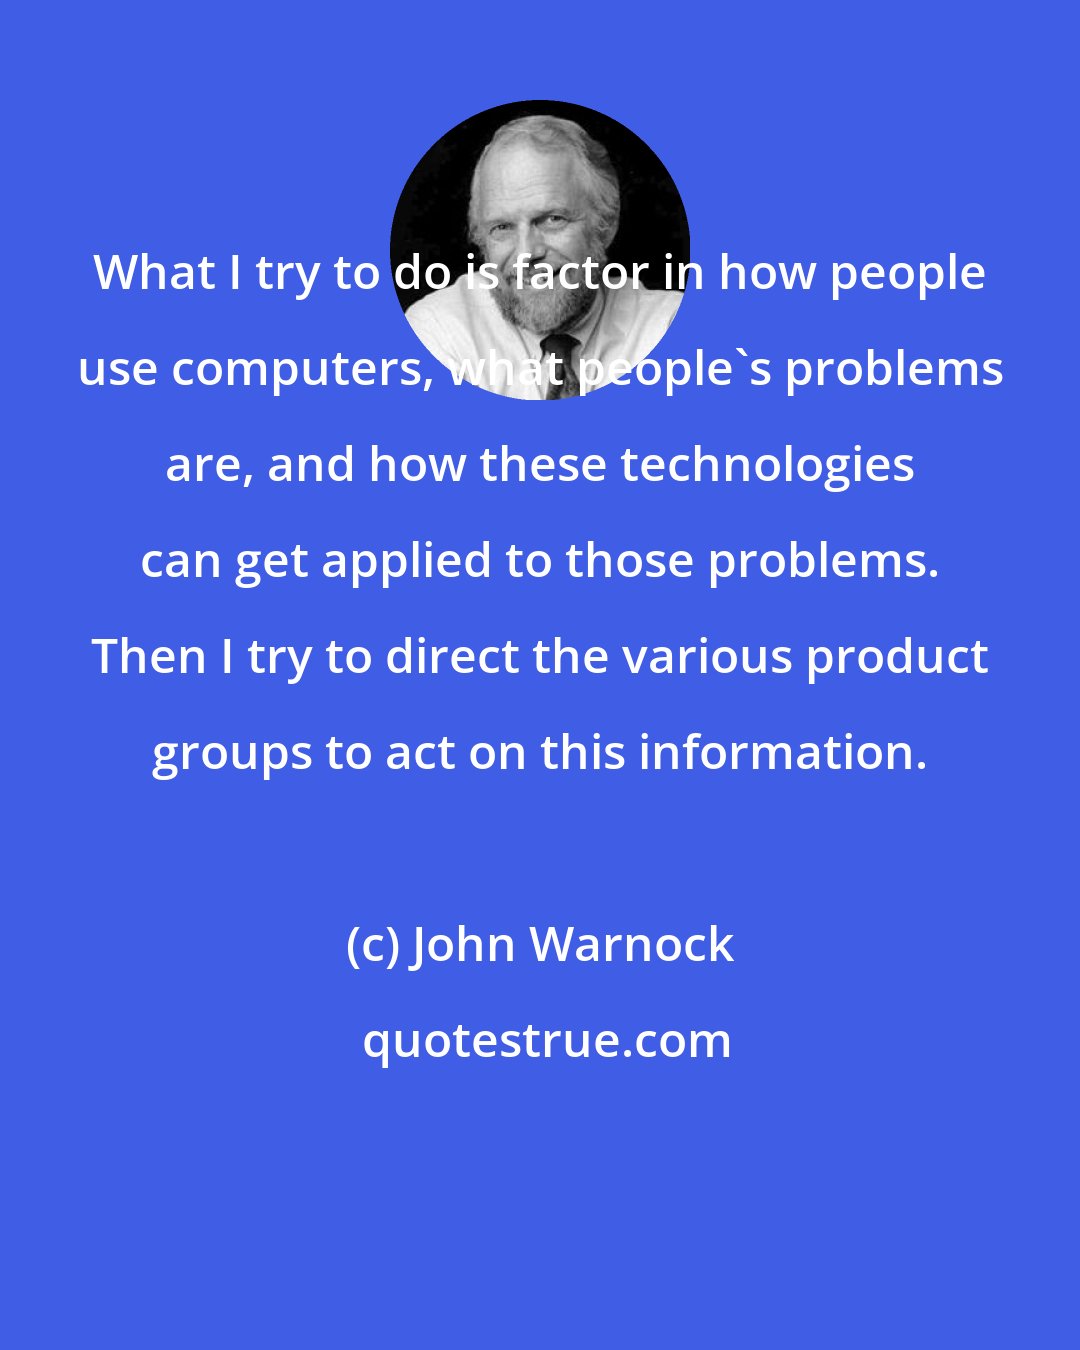 John Warnock: What I try to do is factor in how people use computers, what people's problems are, and how these technologies can get applied to those problems. Then I try to direct the various product groups to act on this information.